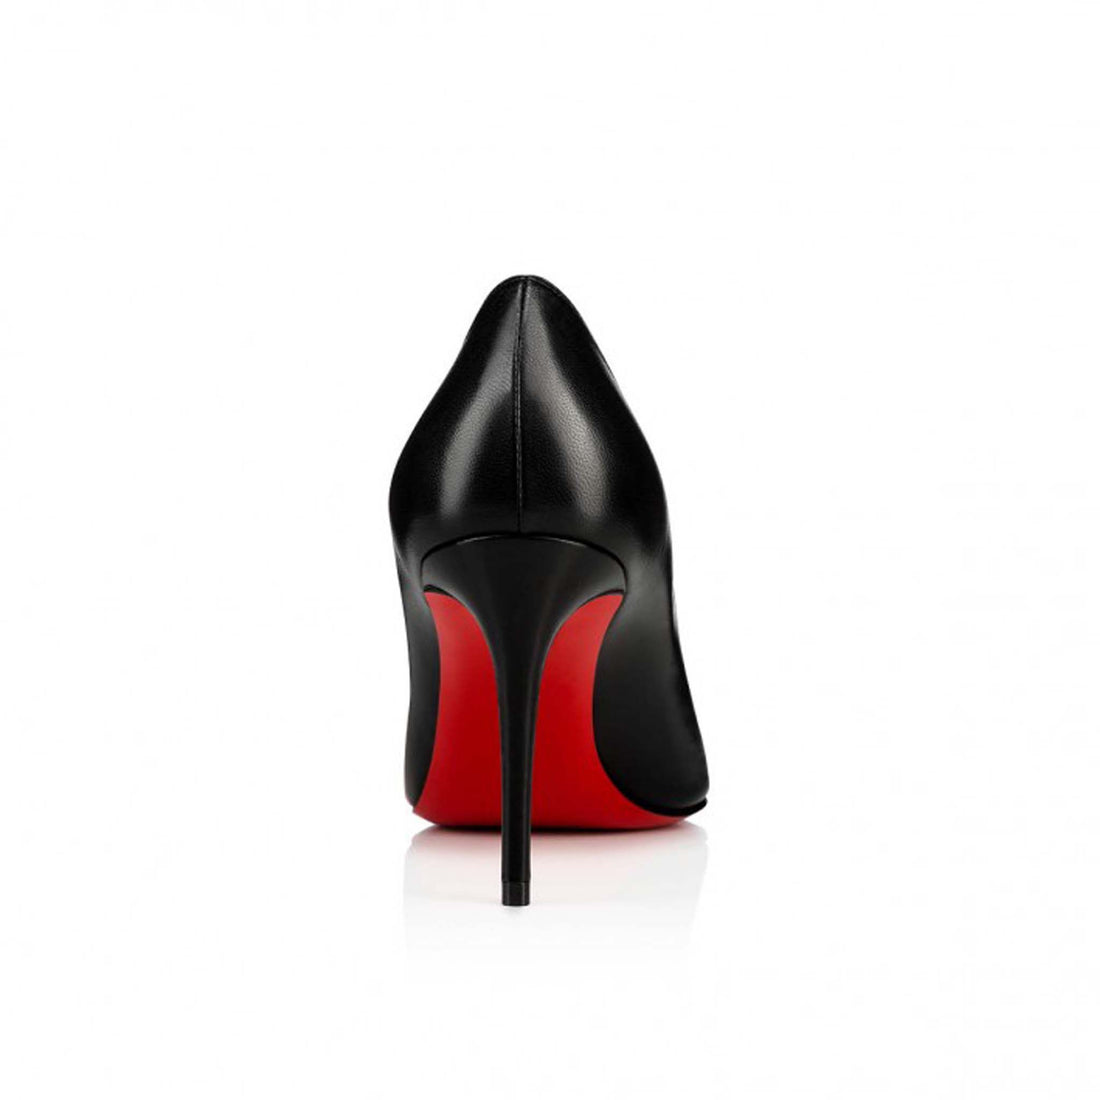 Christian Louboutin Elegant Black Leather Pumps with Iconic Sole